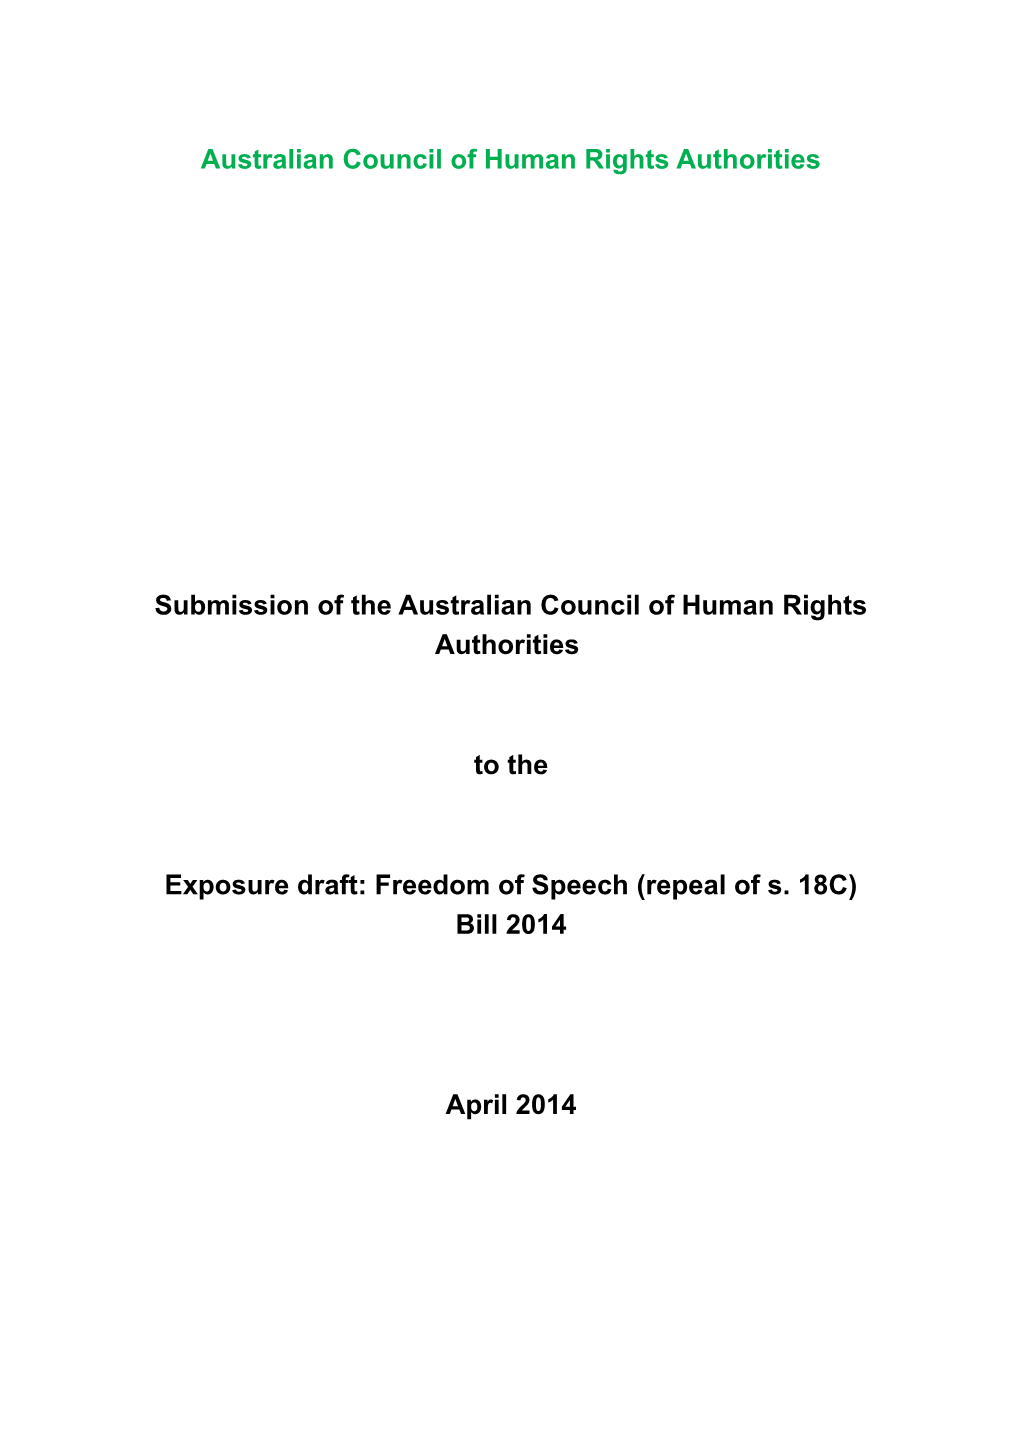 Submission of the Australian Council of Human Rights Authorities